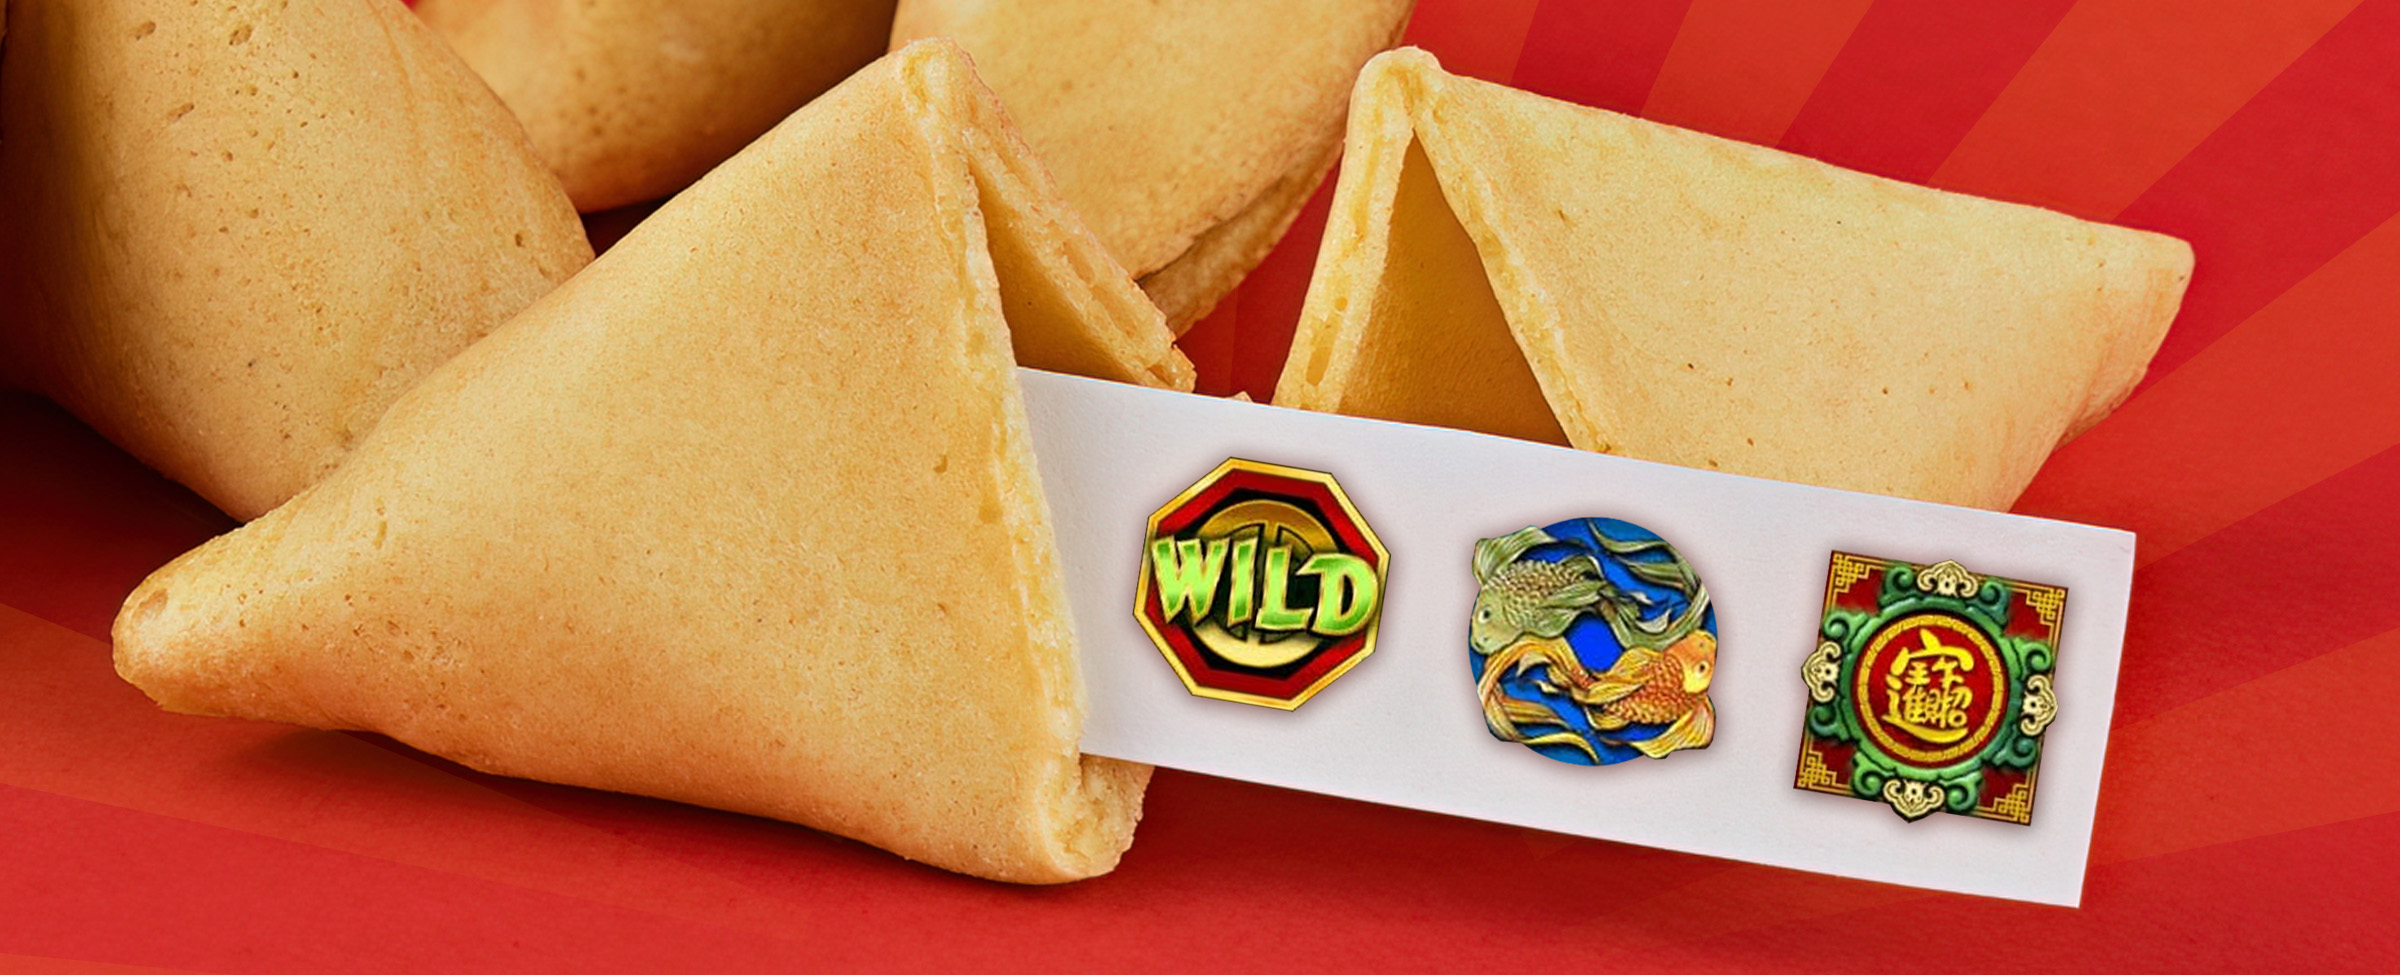 A cluster of fortune cookies is shown against a red background, while inside one of the cookies, a white paper displaying three animated logos which are featured from the Cafe Casino slot game, Gongxi Facai, appears.